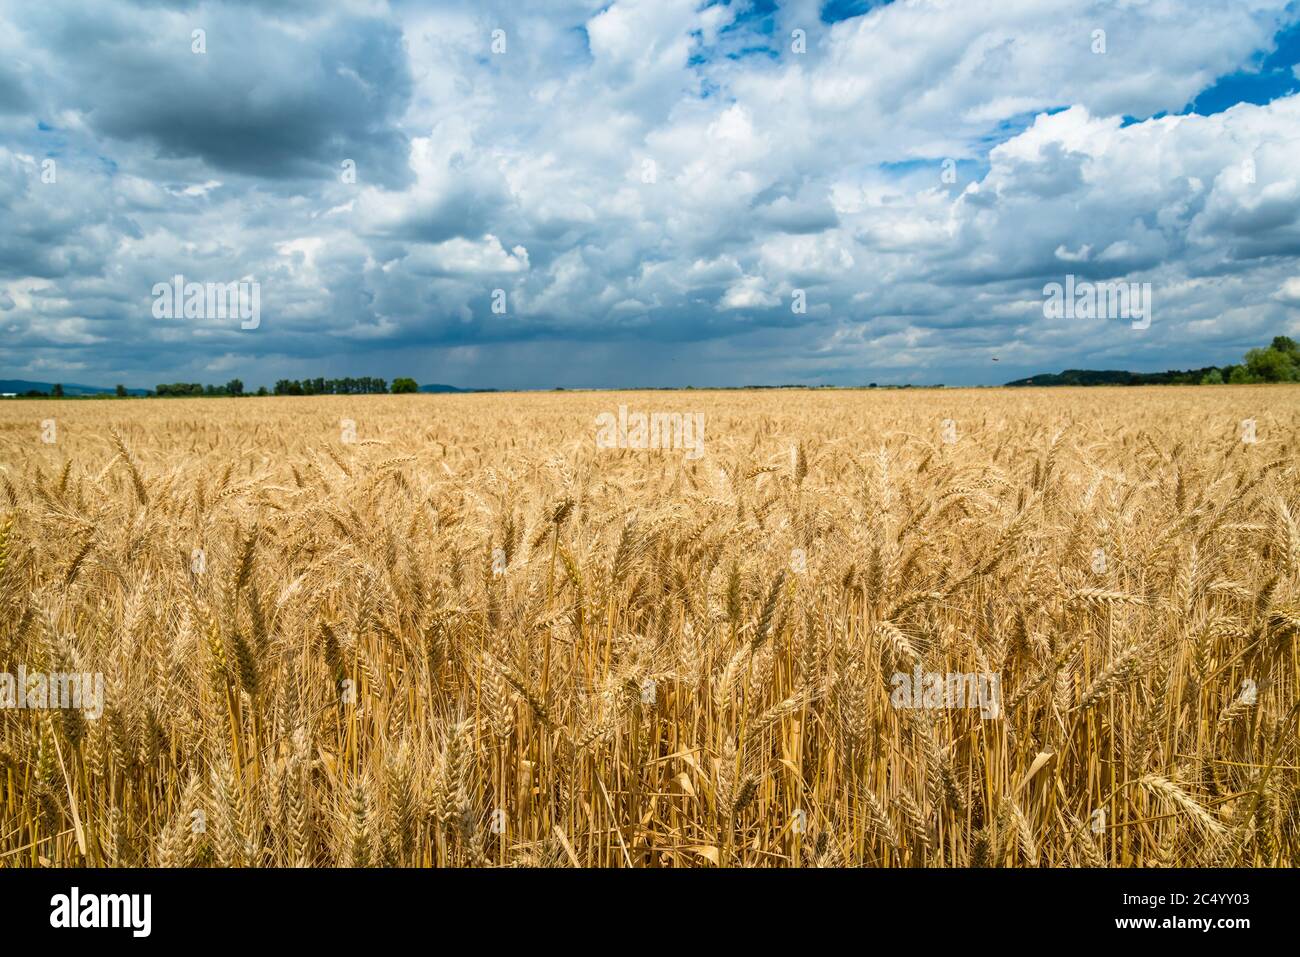 Golden wheat field with blue sky and white clouds in background Stock Photo